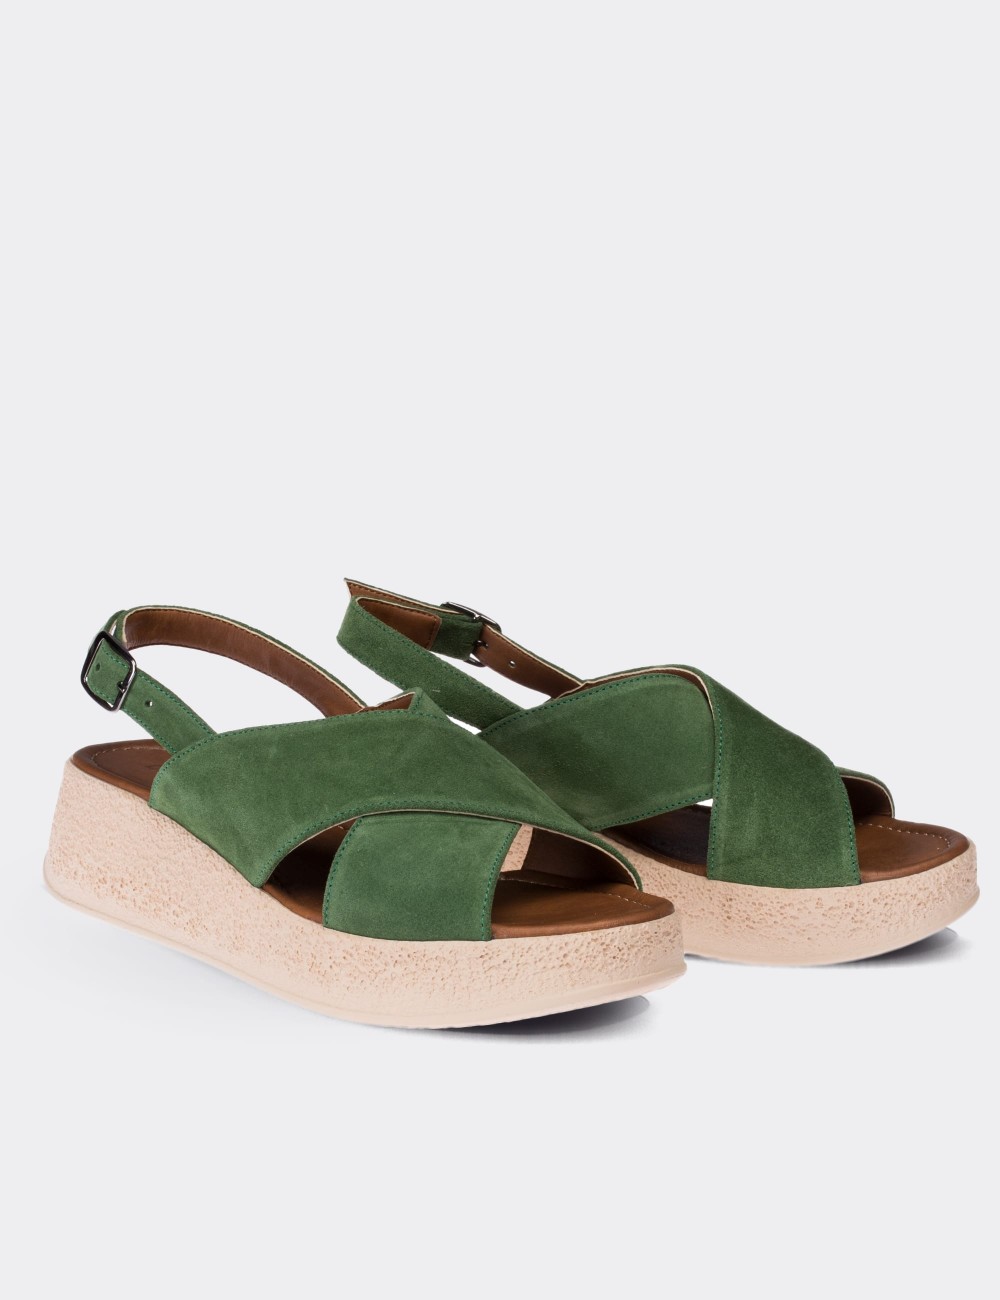 Green Suede Leather  Sandals - 02126ZYSLP01